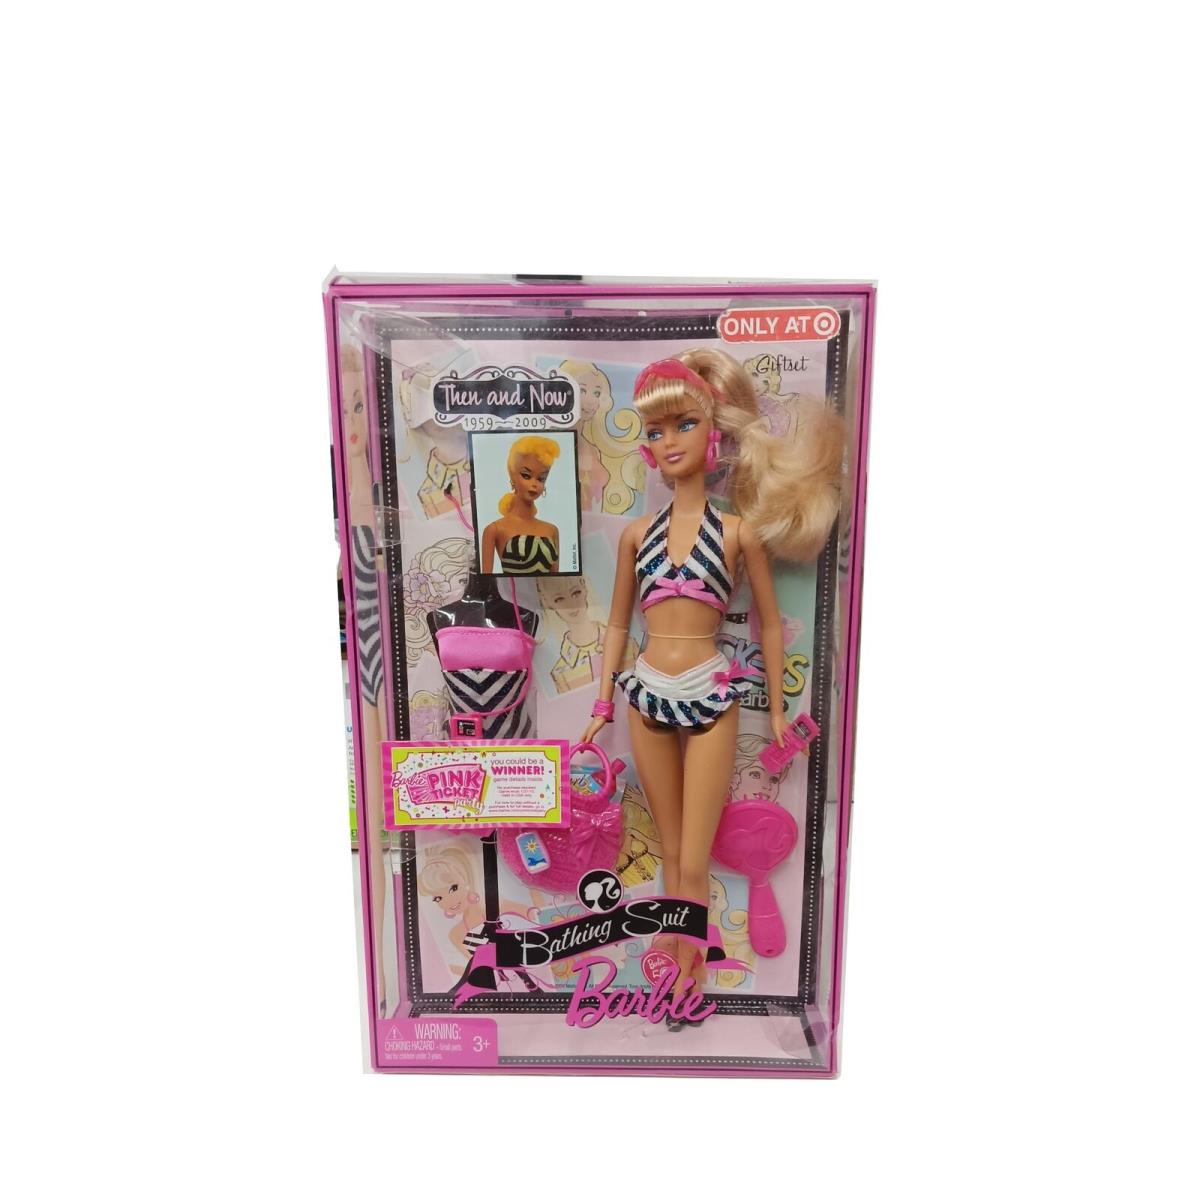 Barbie Bathing Suit Barbie Then and Now 1959-2009